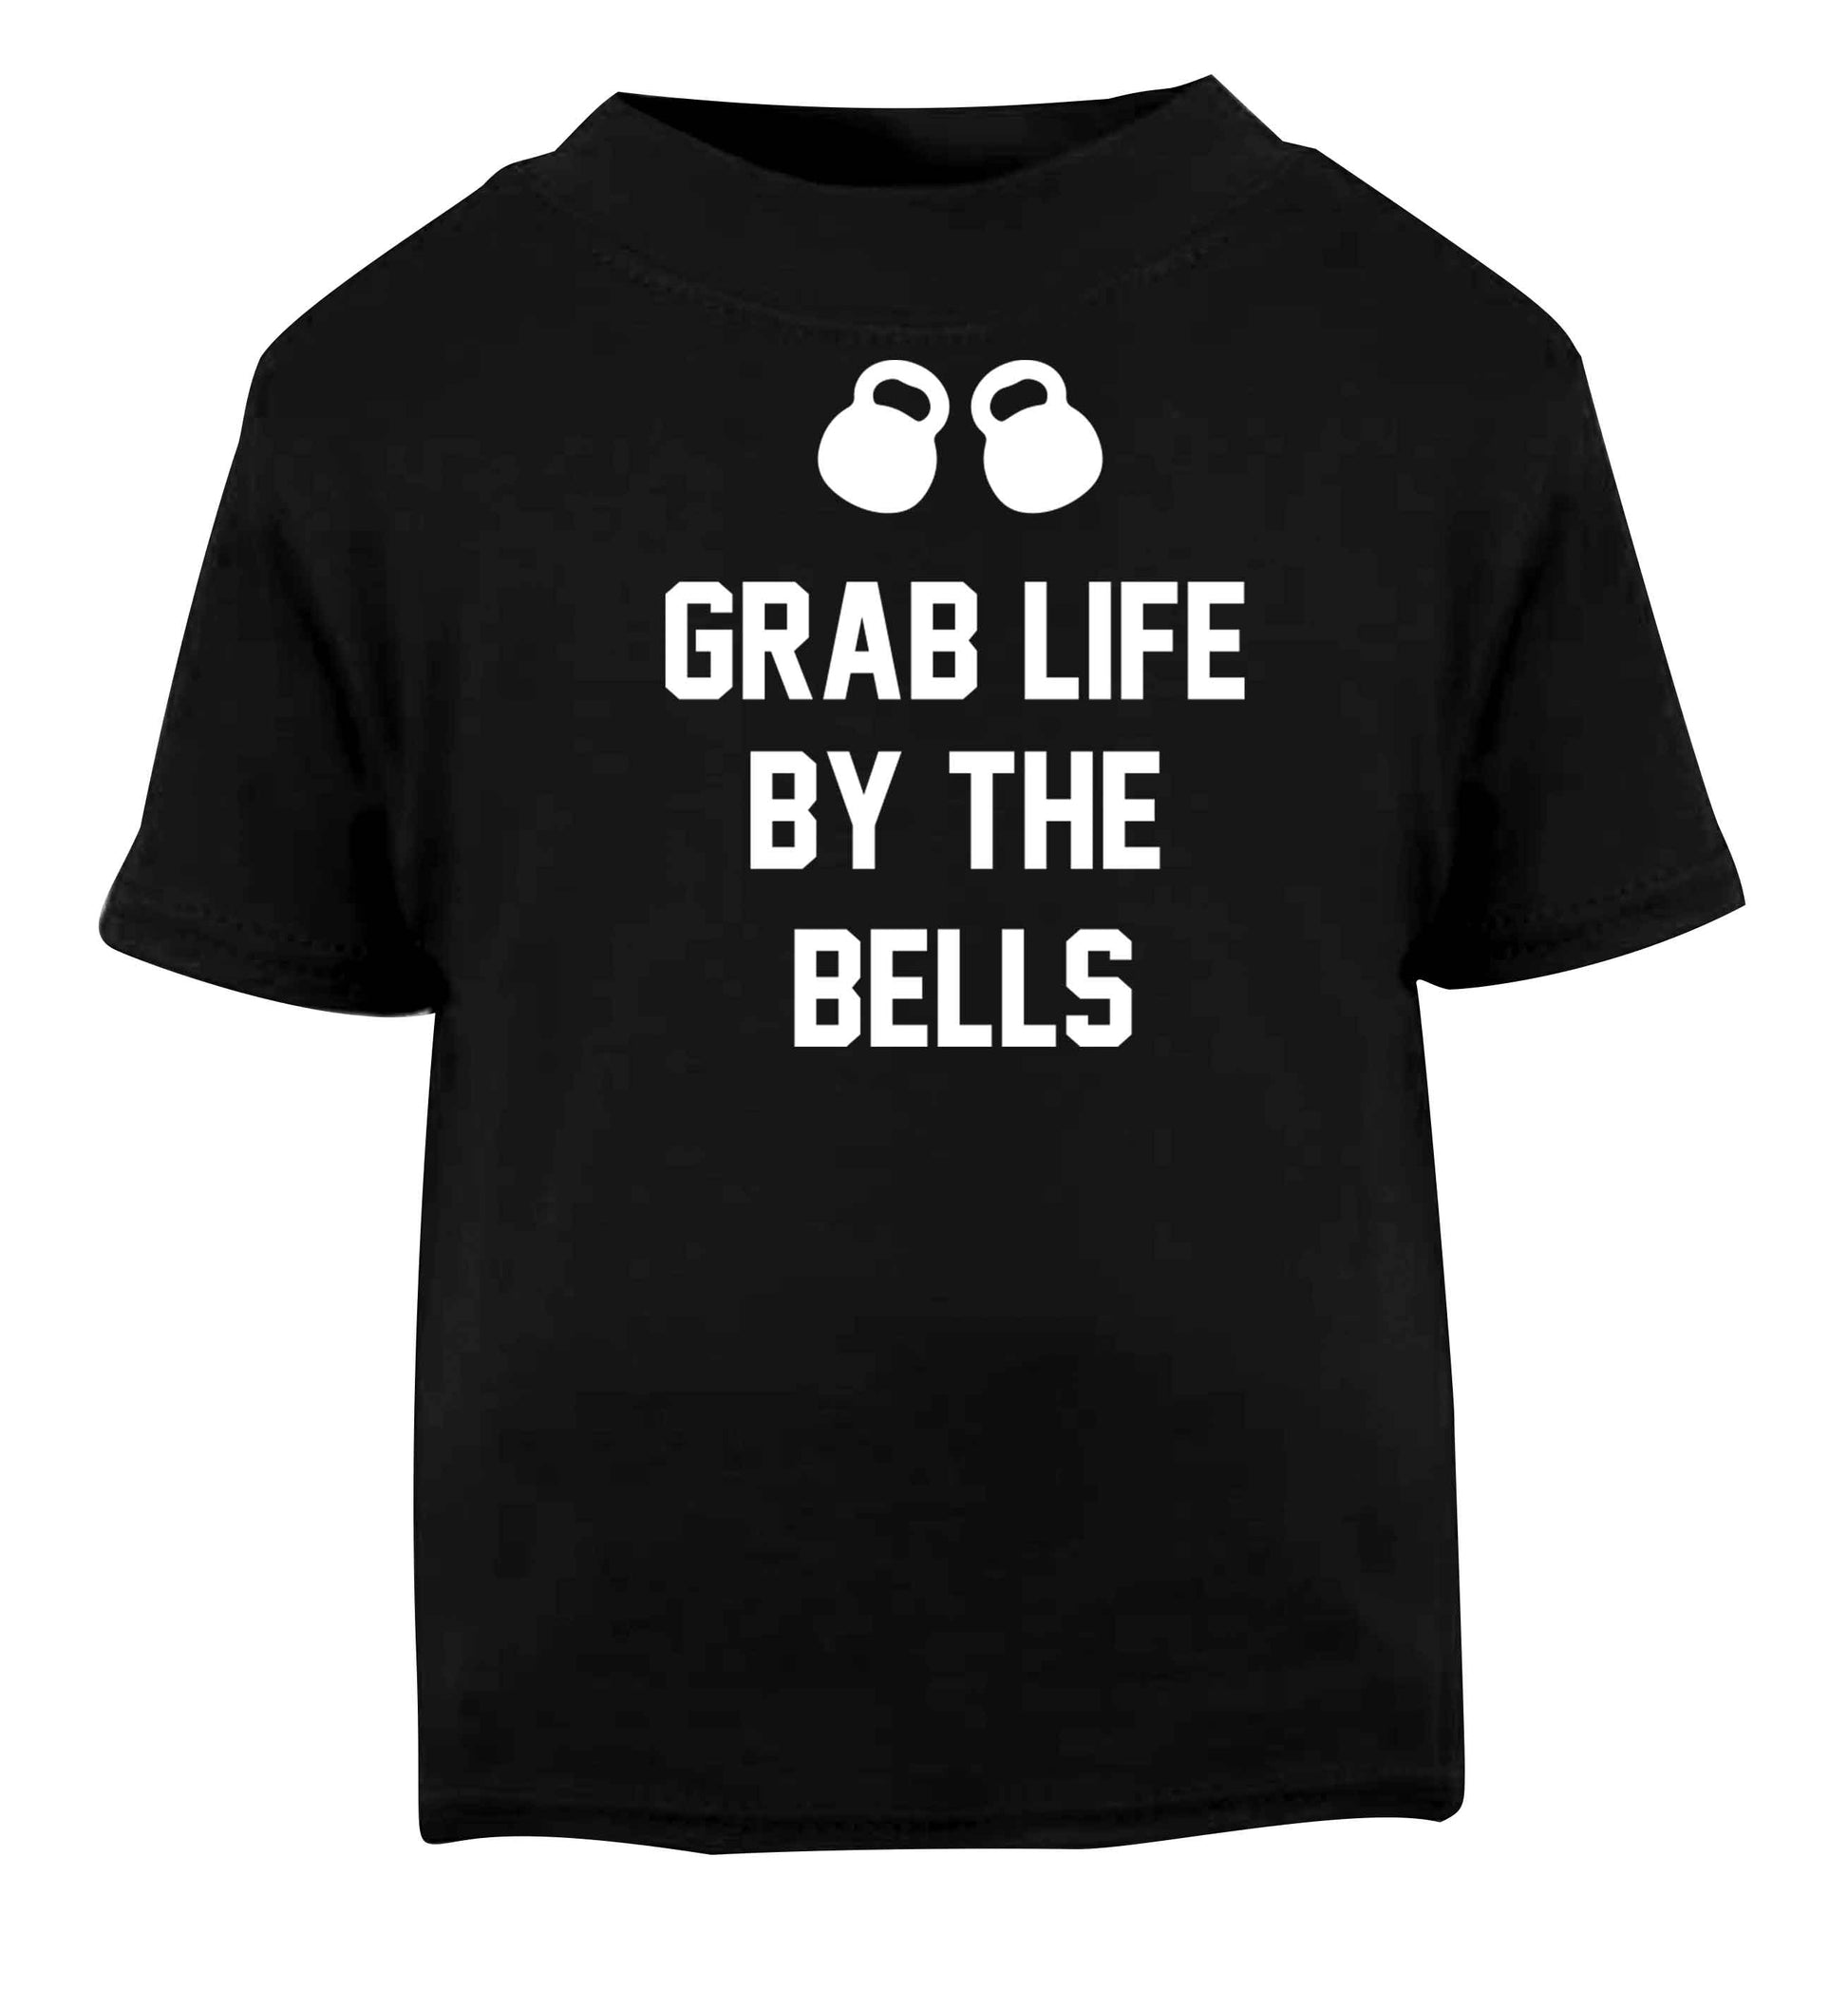 Grab life by the bells Black baby toddler Tshirt 2 years